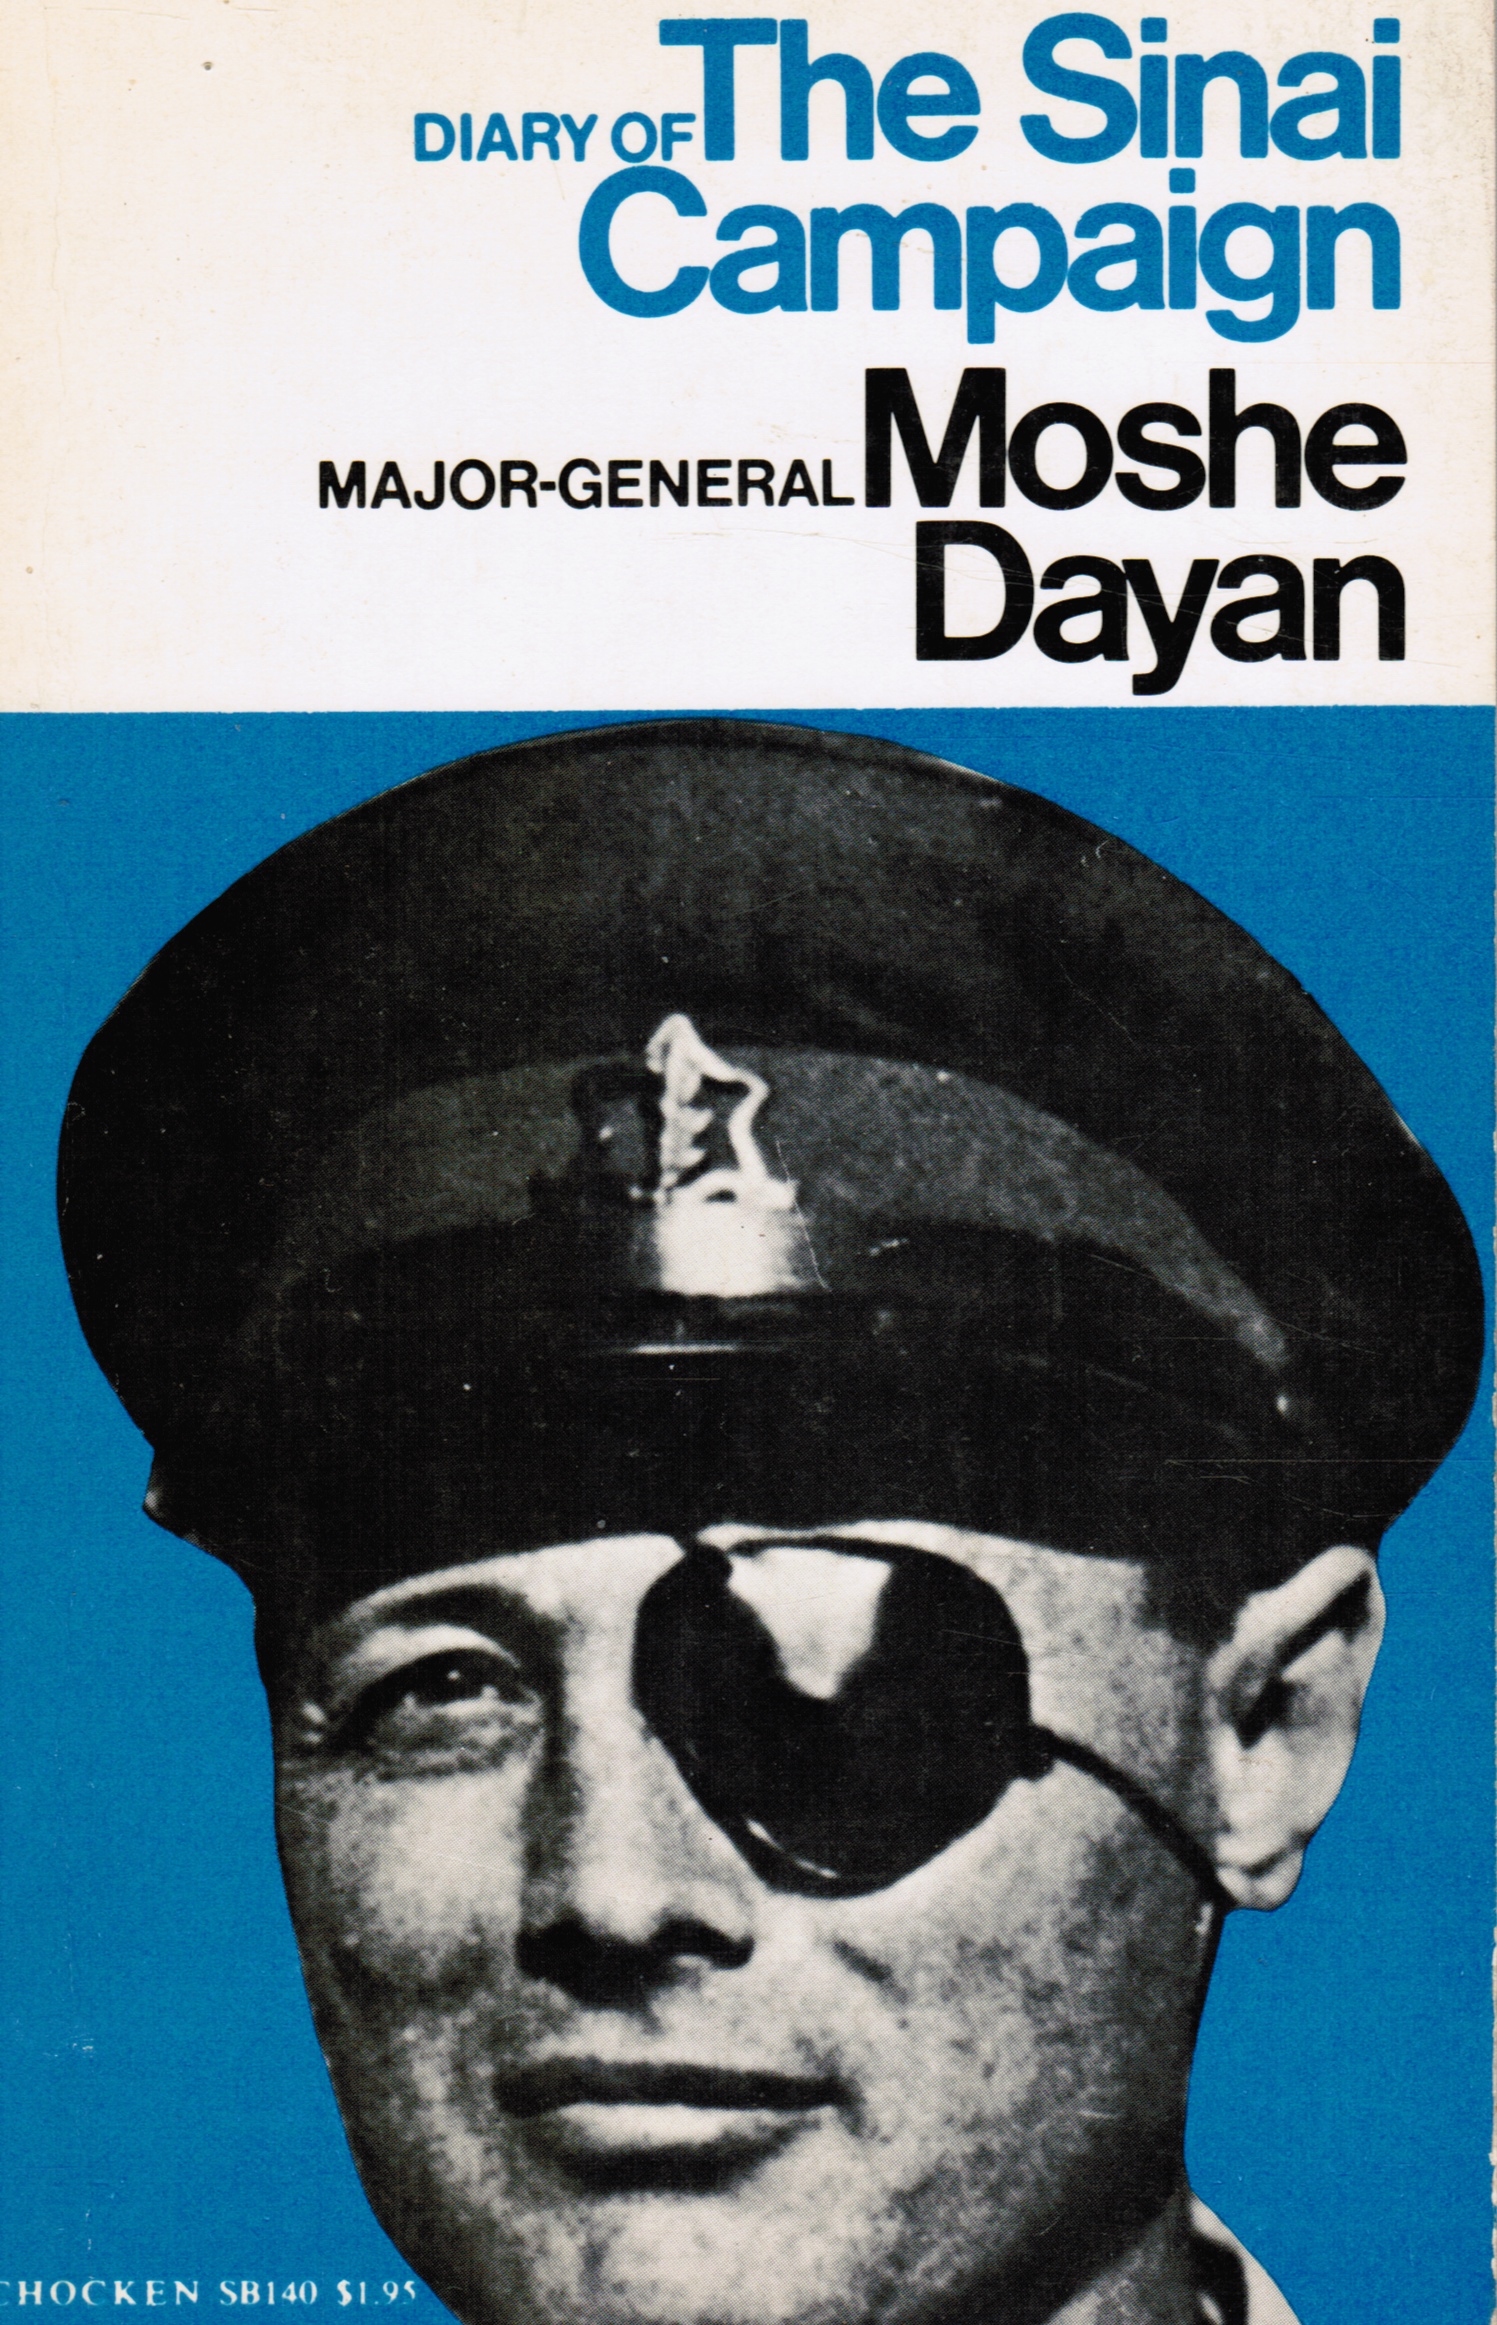 DAYAN, MOSHE - Diary of the Sinai Campaign